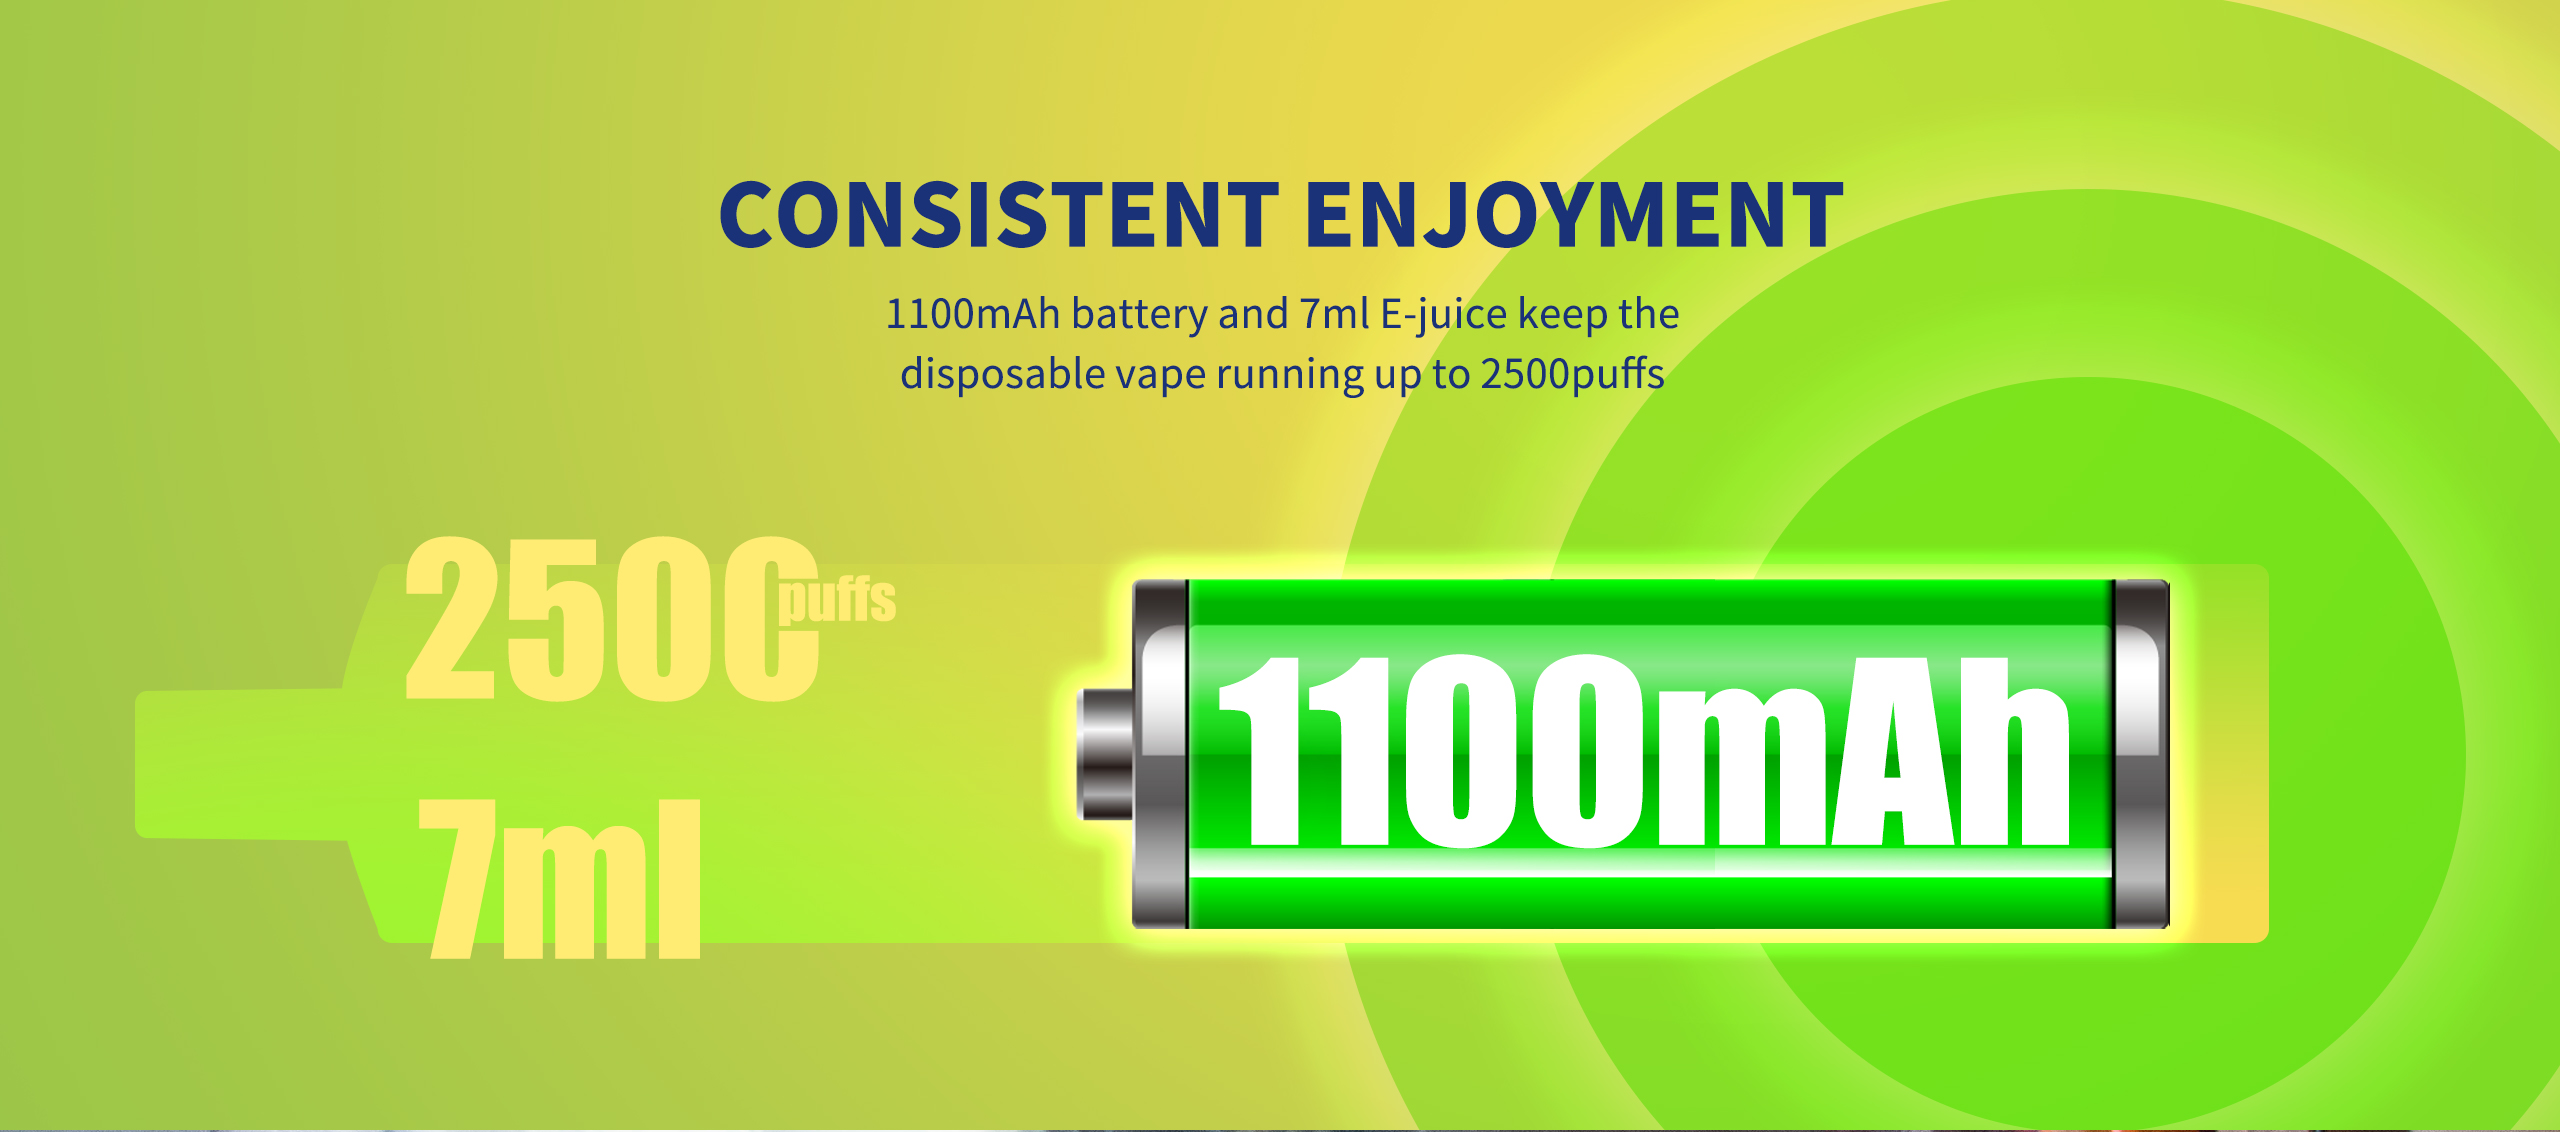 How Does the IRIS-PRO Electronic Cigarette Compare to Others